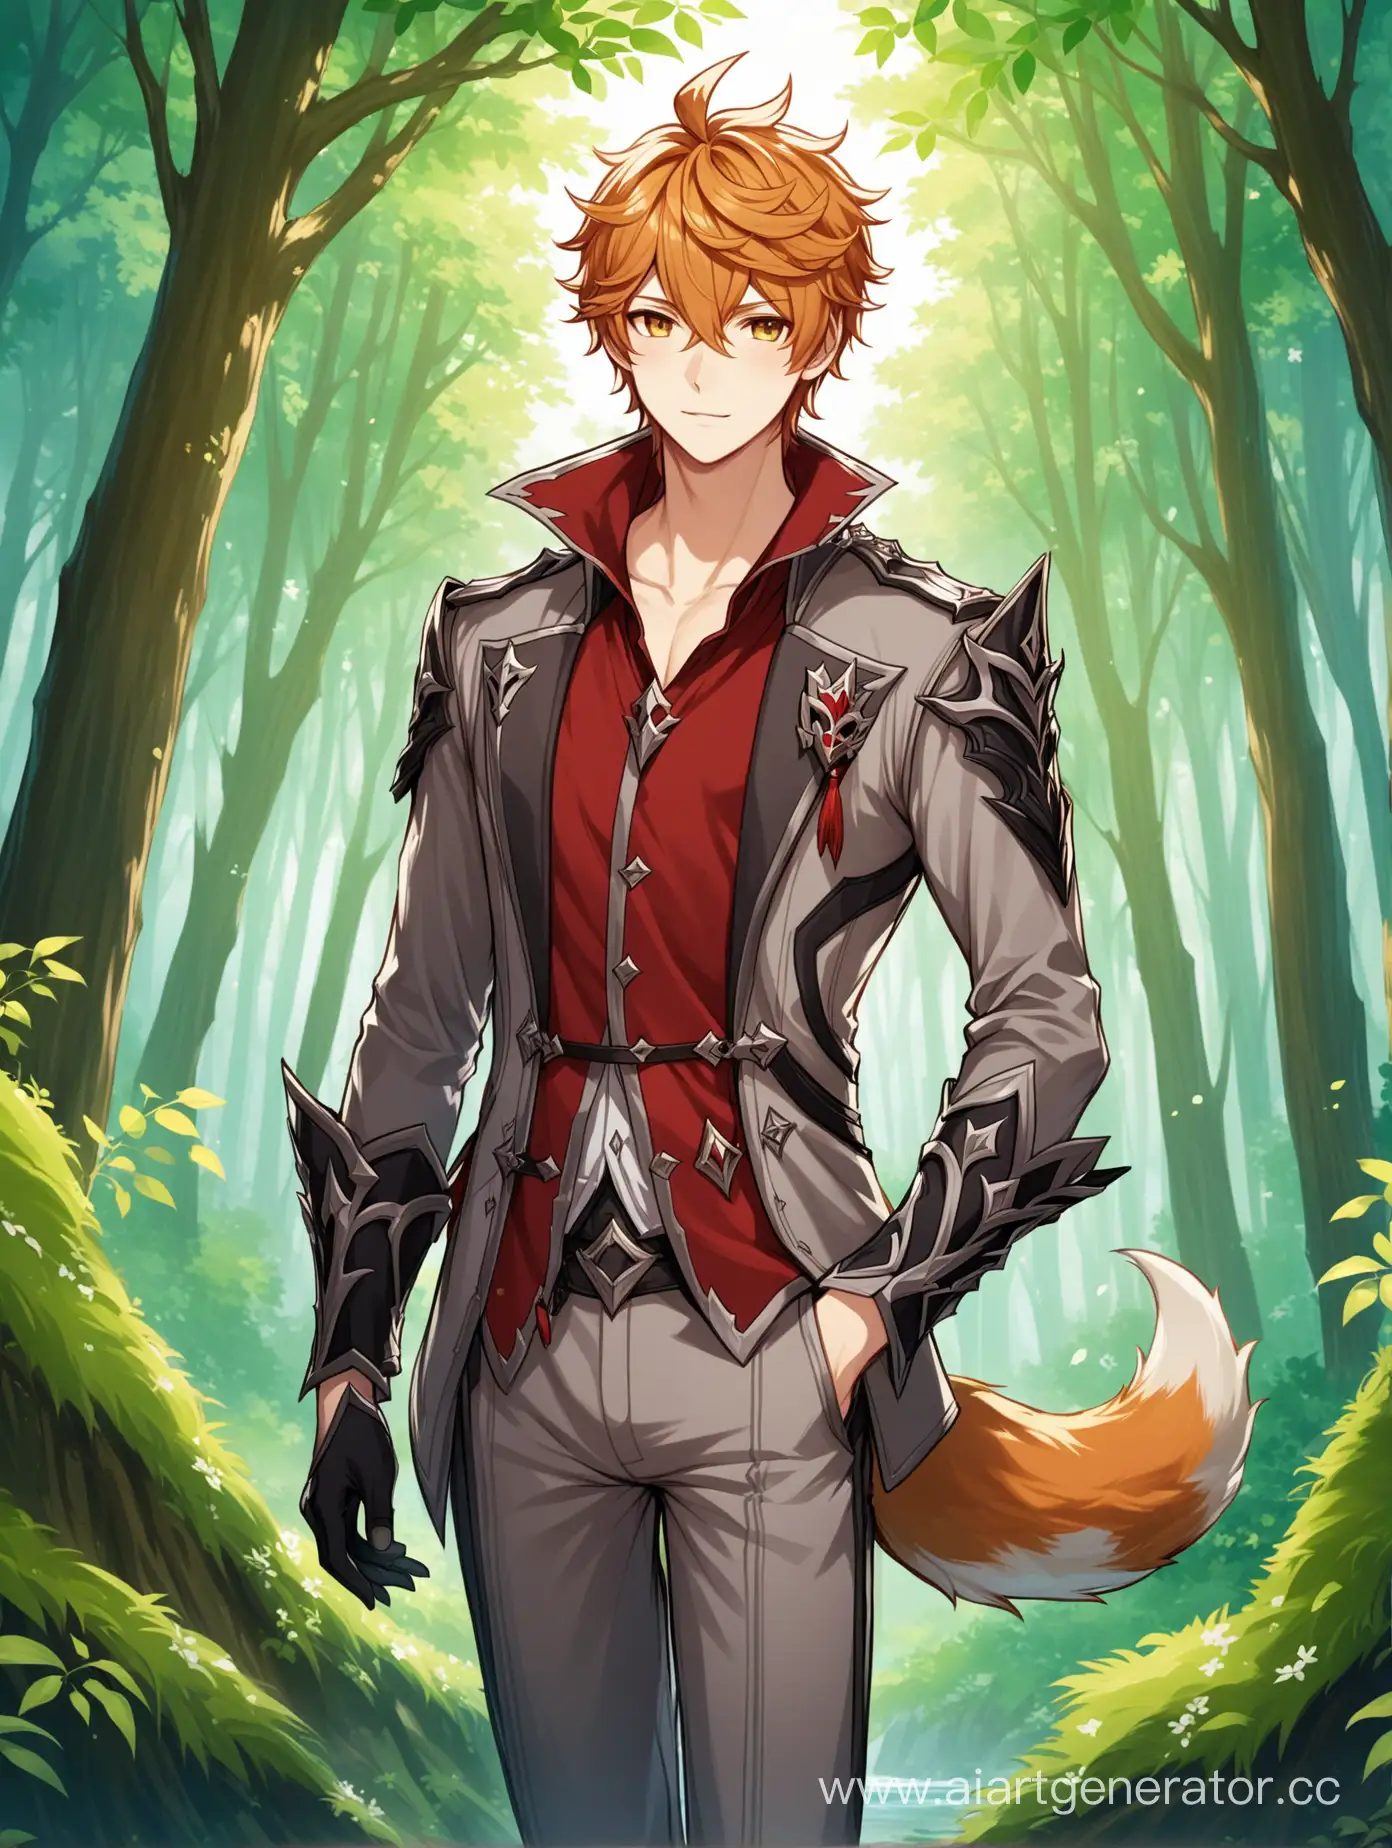 Mysterious-Fox-Warrior-beckoning-in-Enchanted-Forest